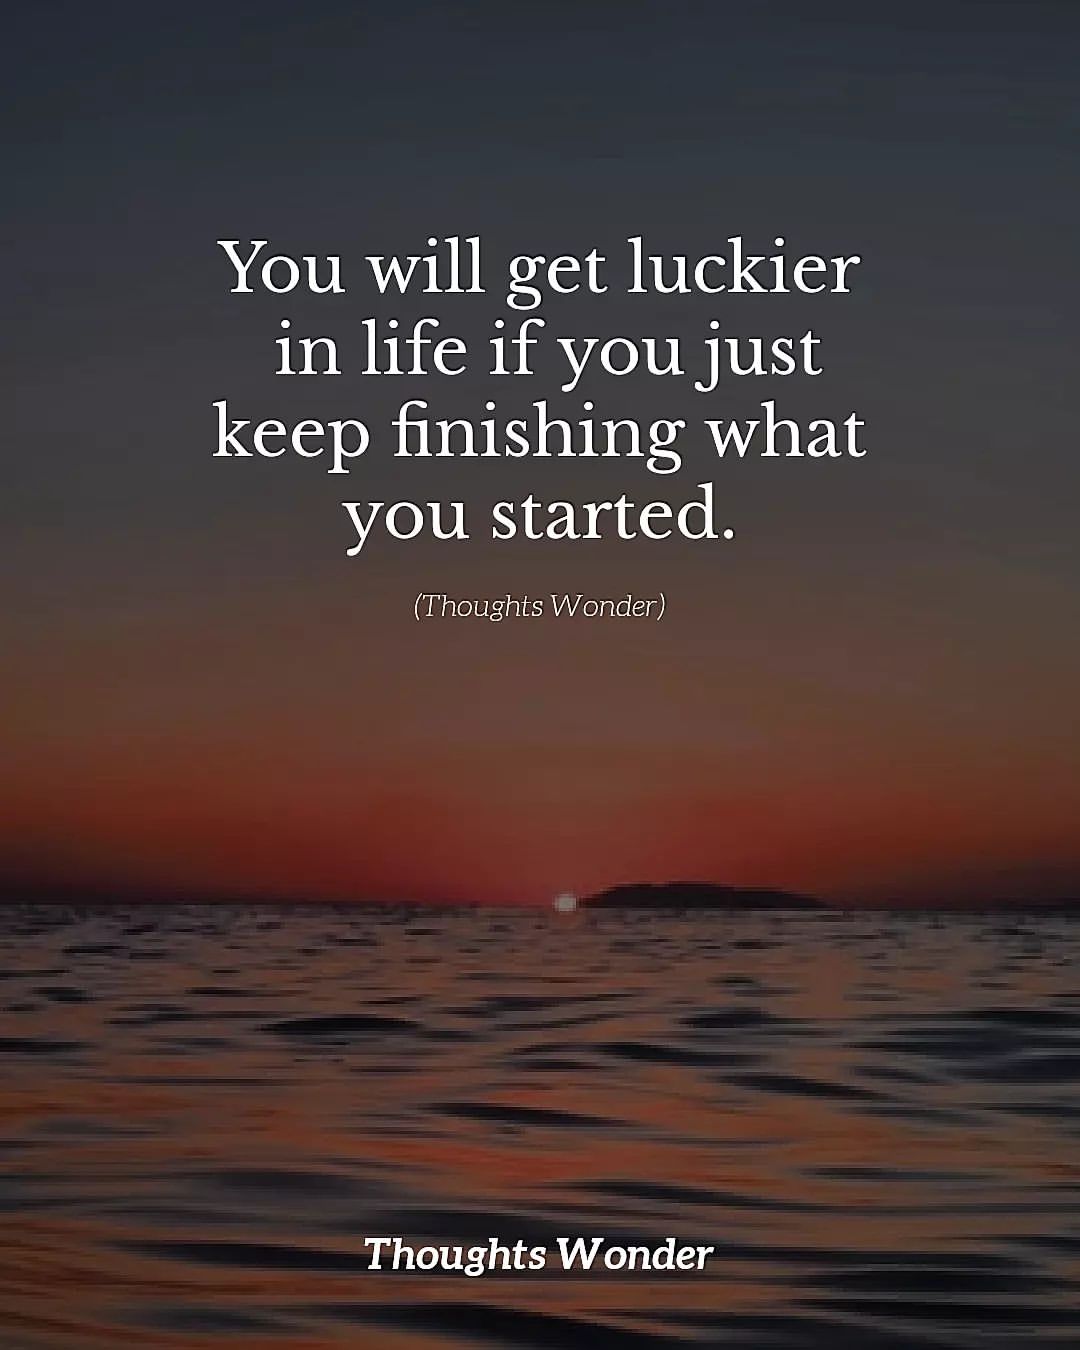 You will get luckier in life if you just keep finishing what you started.